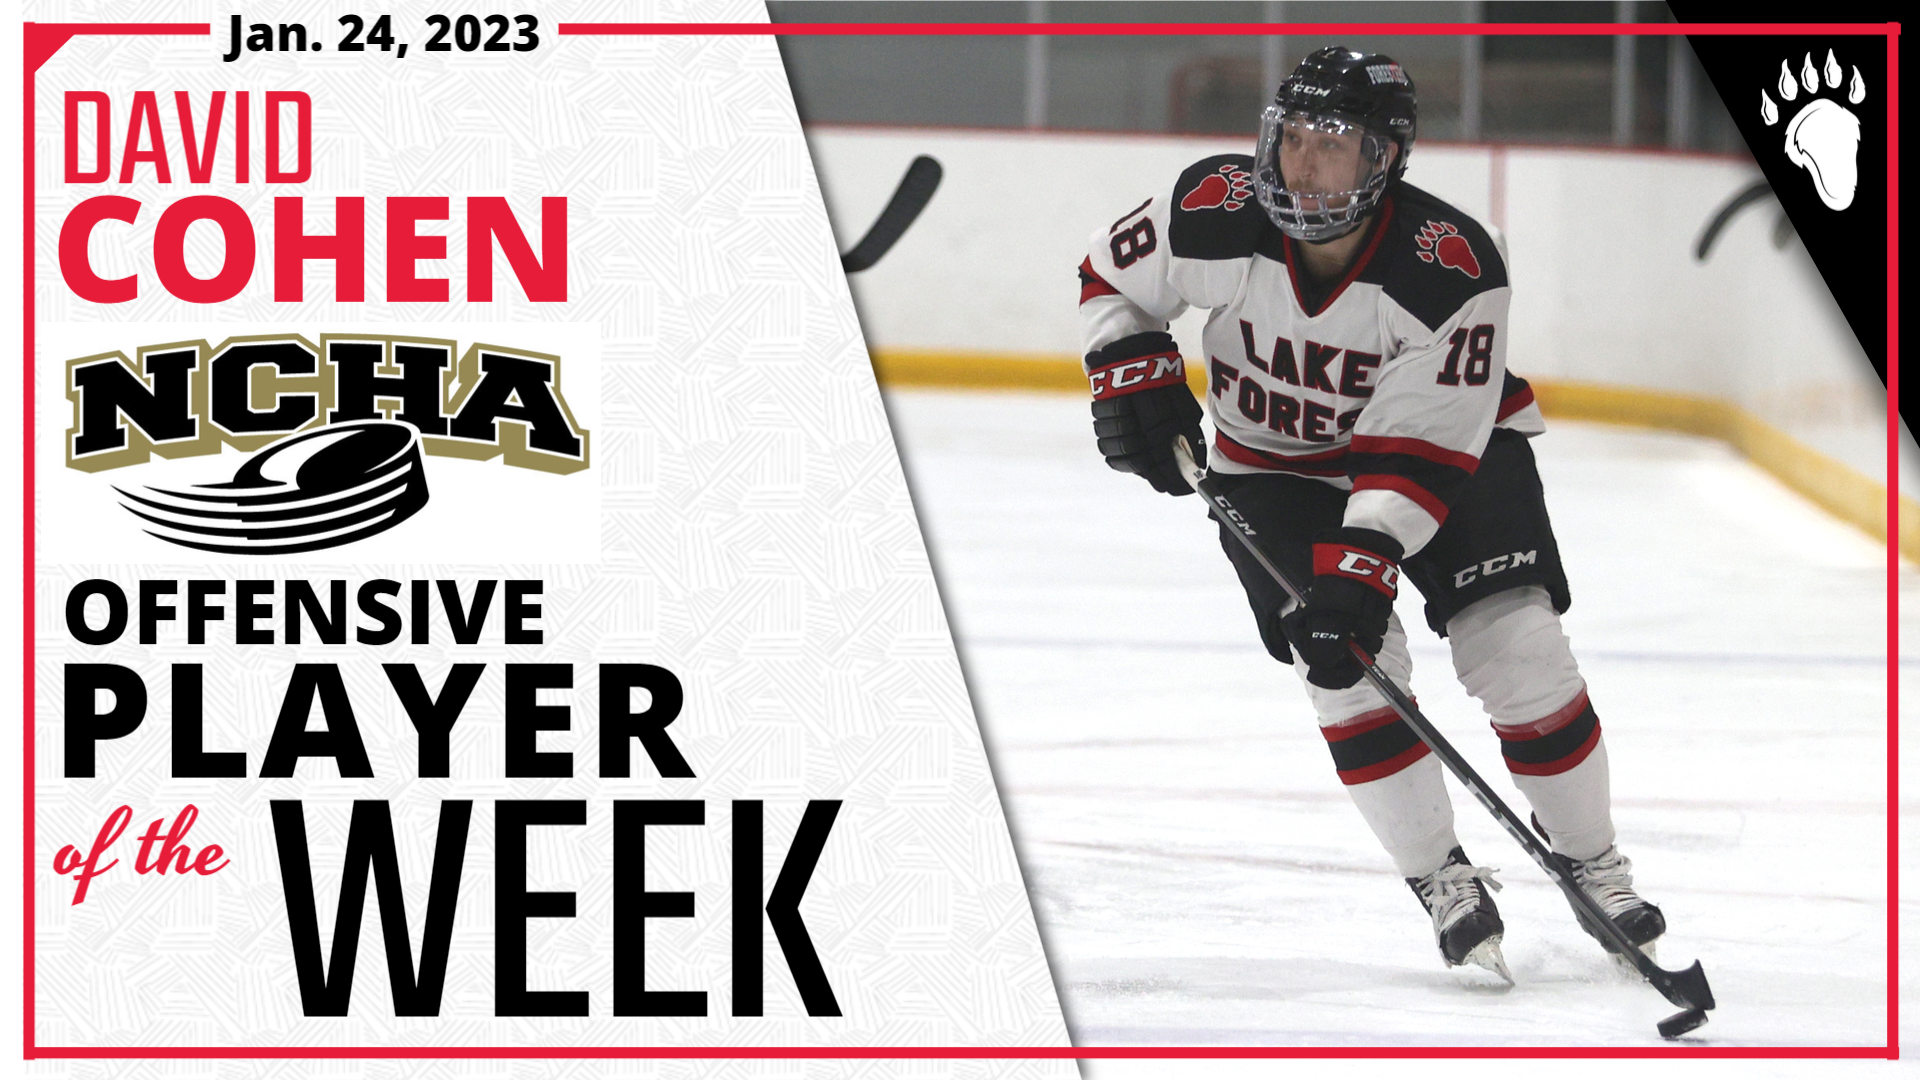 David Cohen Named NCHA Offensive Player of the Week